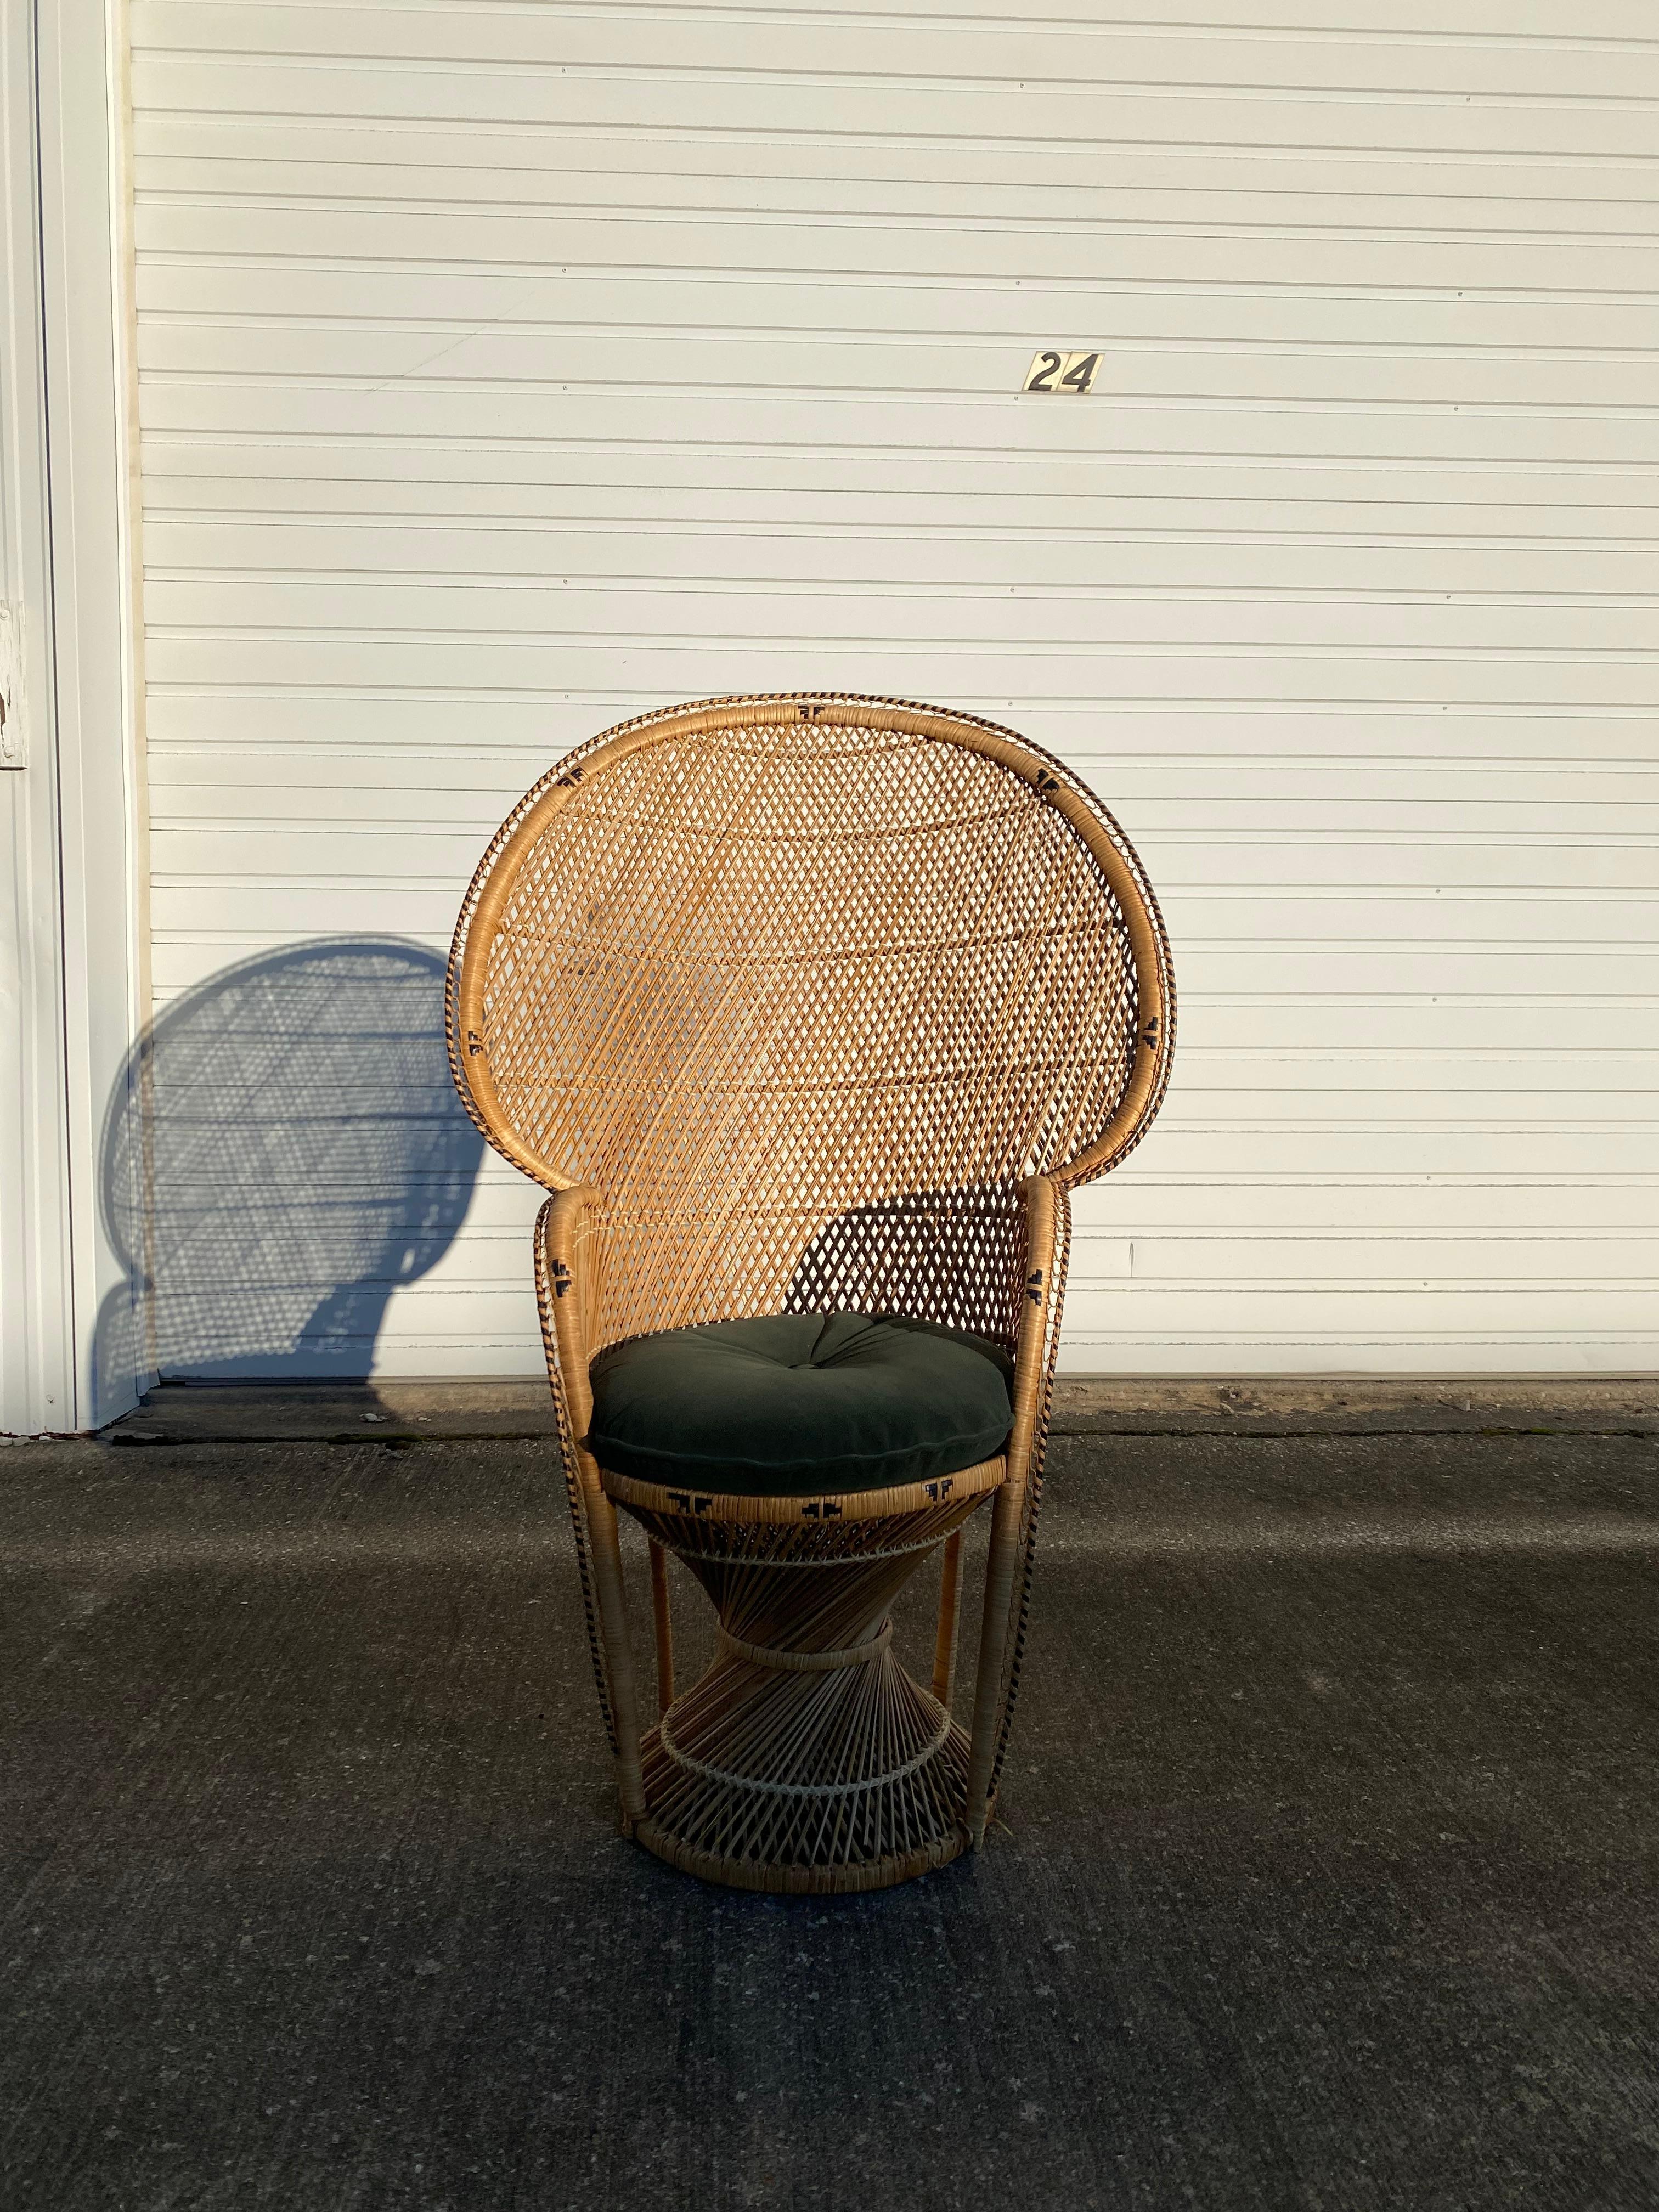 American Vintage Boho Chic Beige & Black Wicker Peacock Chair with New Cushion